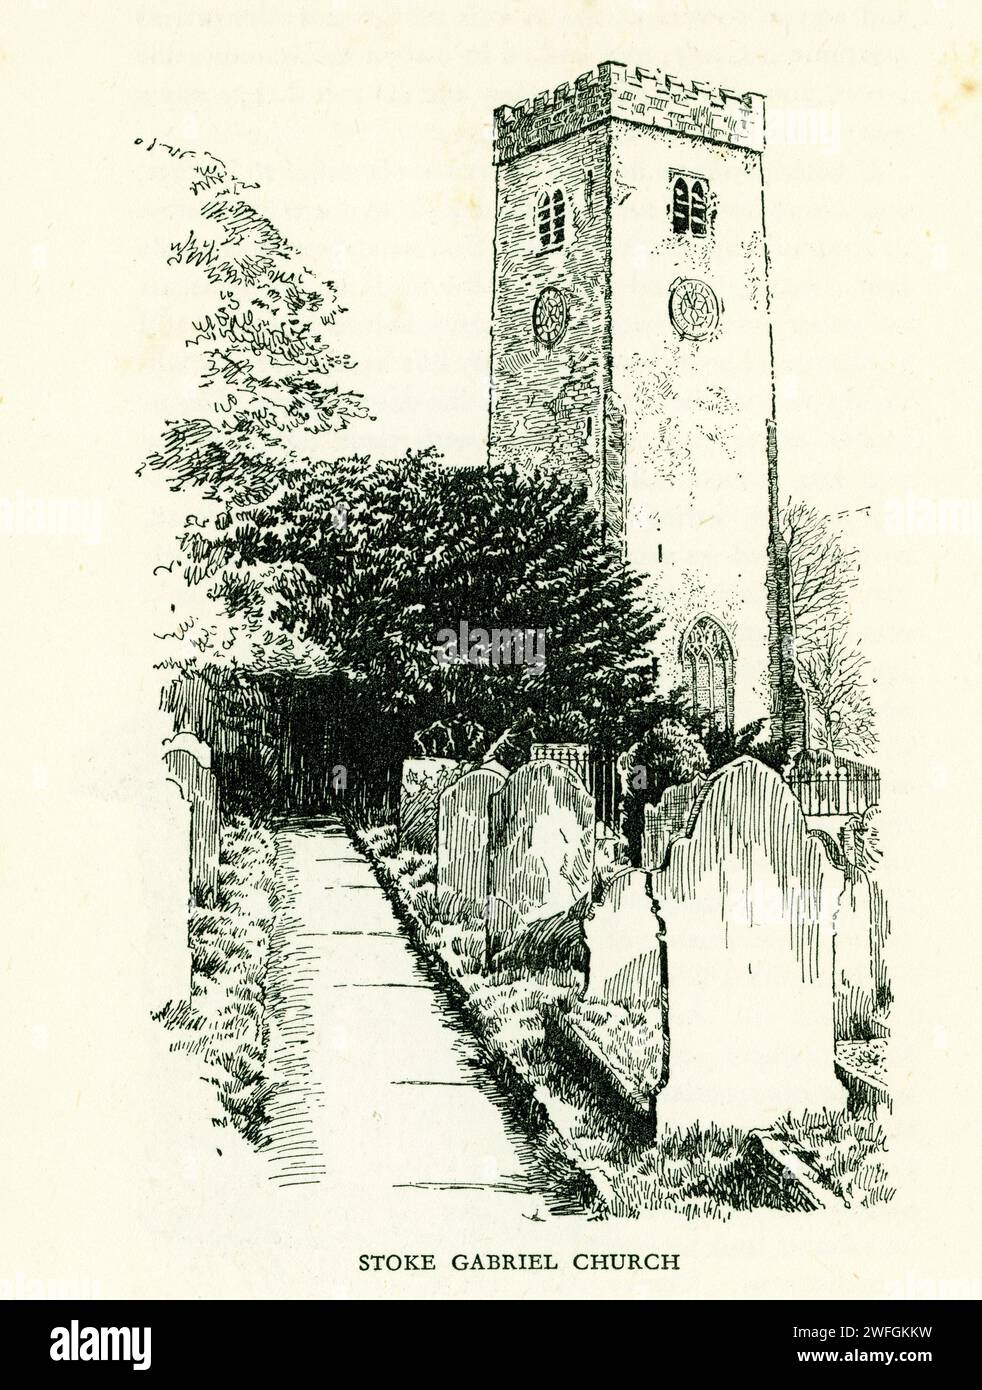 Pen and ink sketch -  Stoke Gabriel Church, River Dart Creek, South Hams district, Devon from the book Glorious Devon.  by S.P.B. Mais, published by London Great Western Railway Company, 1928 Stock Photo